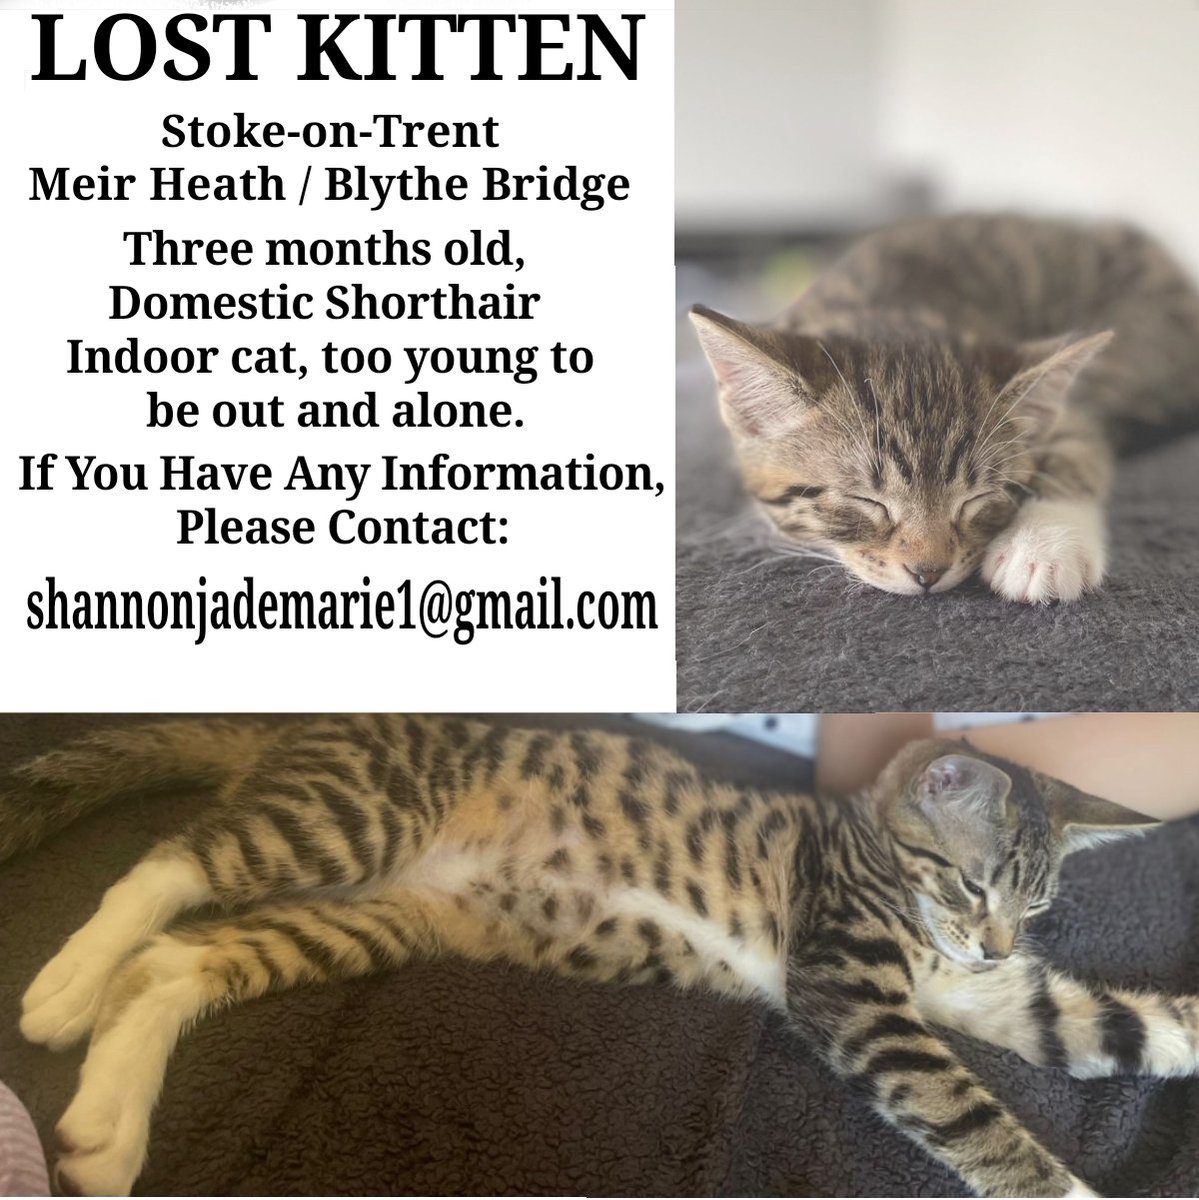 Please share of you are or have contacts near #StokeOnTrent #Staffordshire #MissingCatUK #MissingPetsUK #LostPetsUK